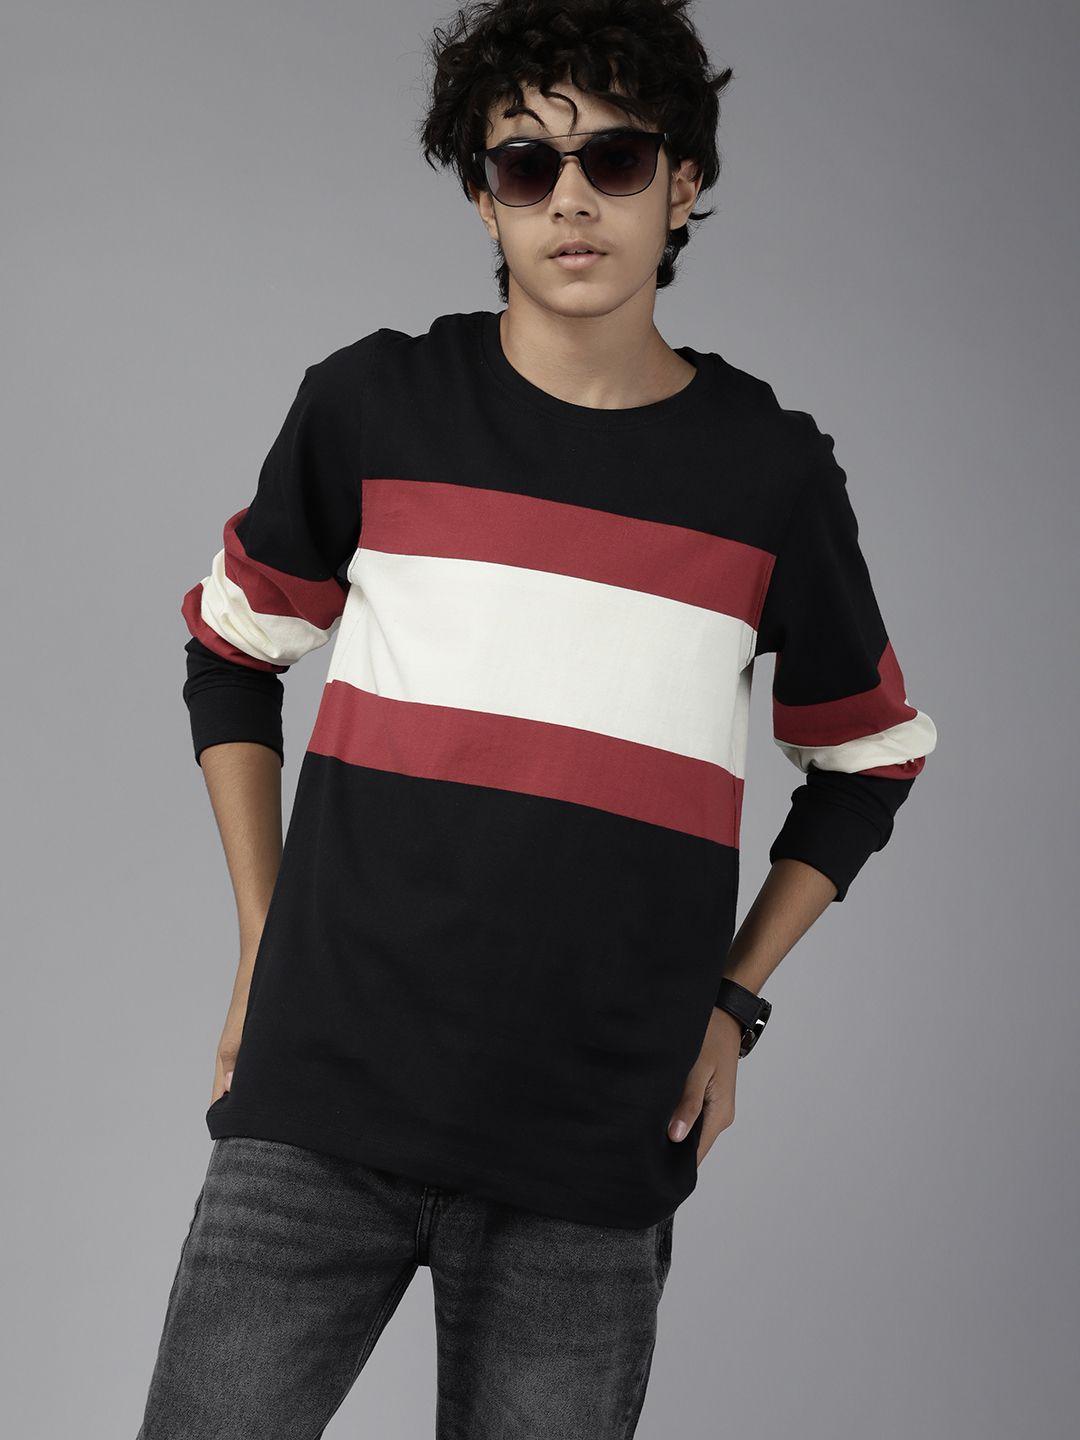 uth by roadster boys black & off white striped pure cotton t-shirt